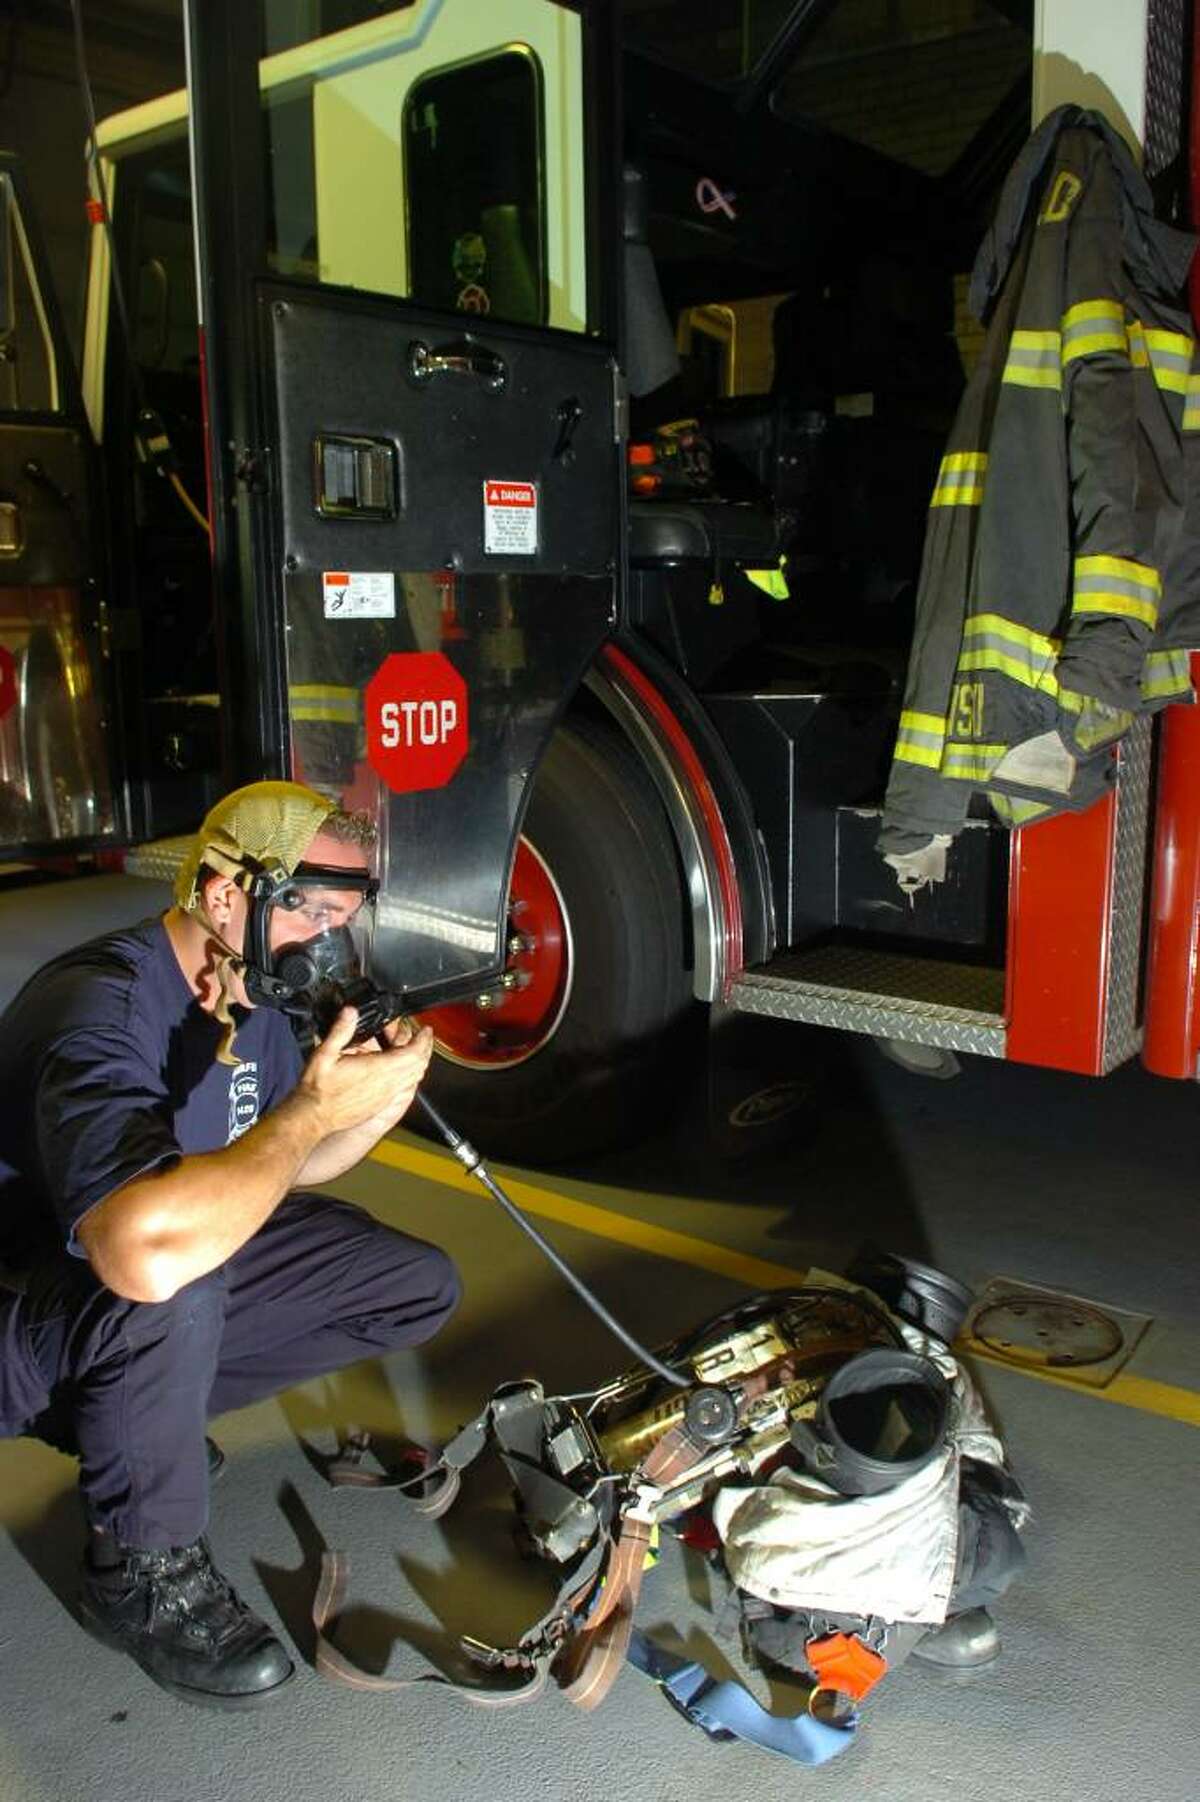 Fairfield firefighter Dennis Eannotti demonstrates how he inspects his self contained breathing apparatus, which includes a bottle of compressed air and breathing regulator.